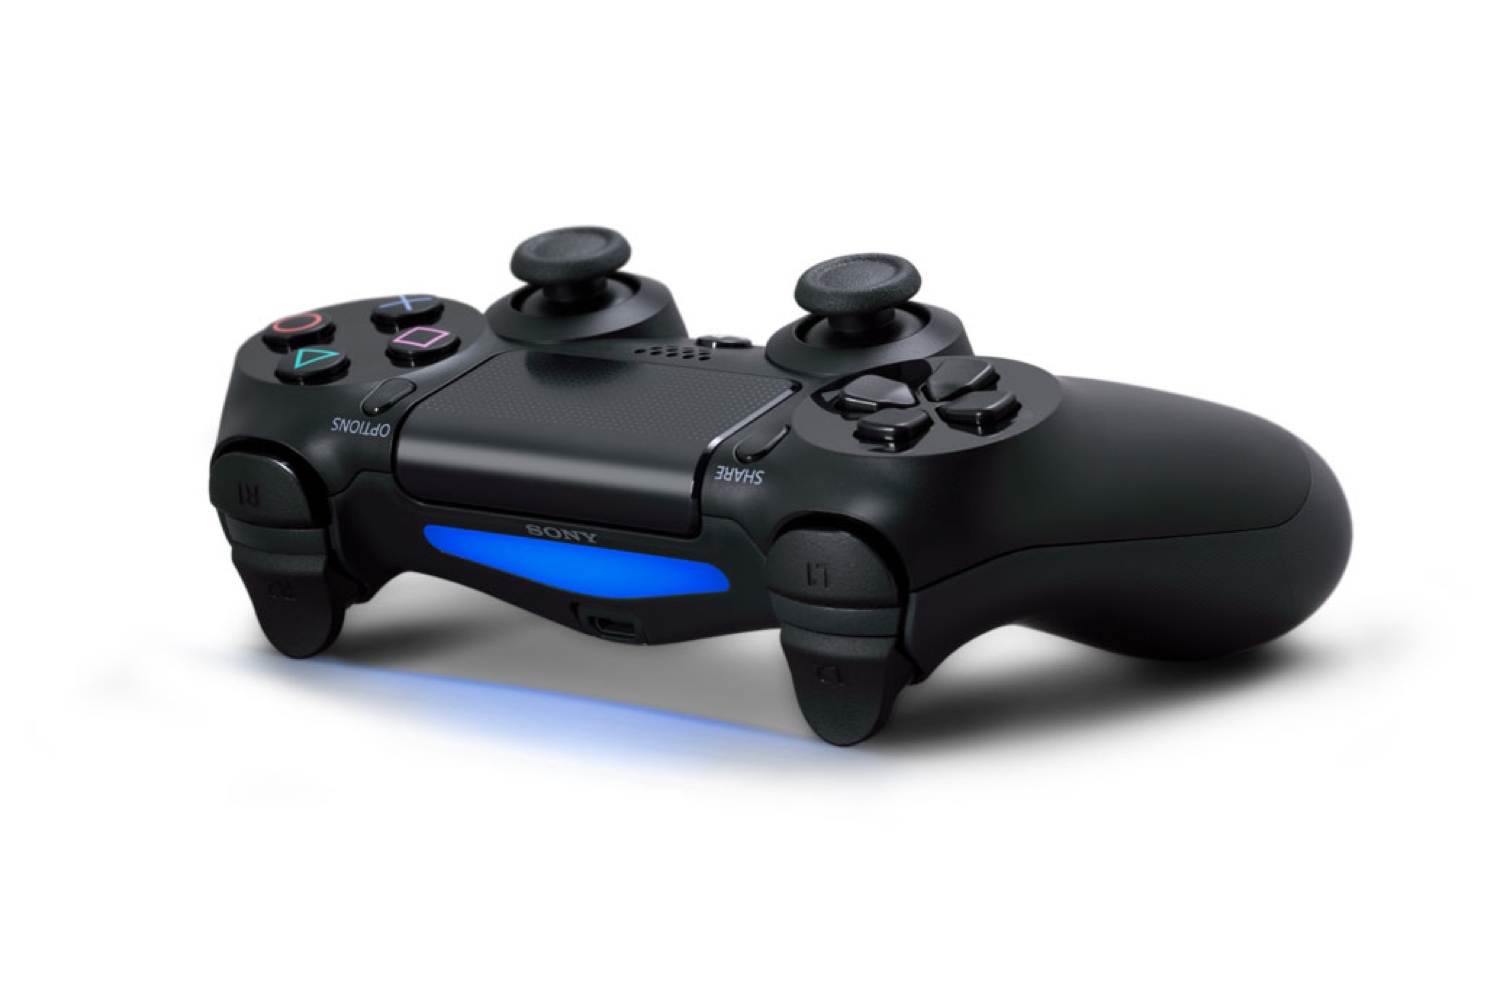 How to connect my new ps4 controller to my ps4 The Ps4 Dualshock 4 Gamepad Is Now Bluetooth Compatible With The Ps3 Time